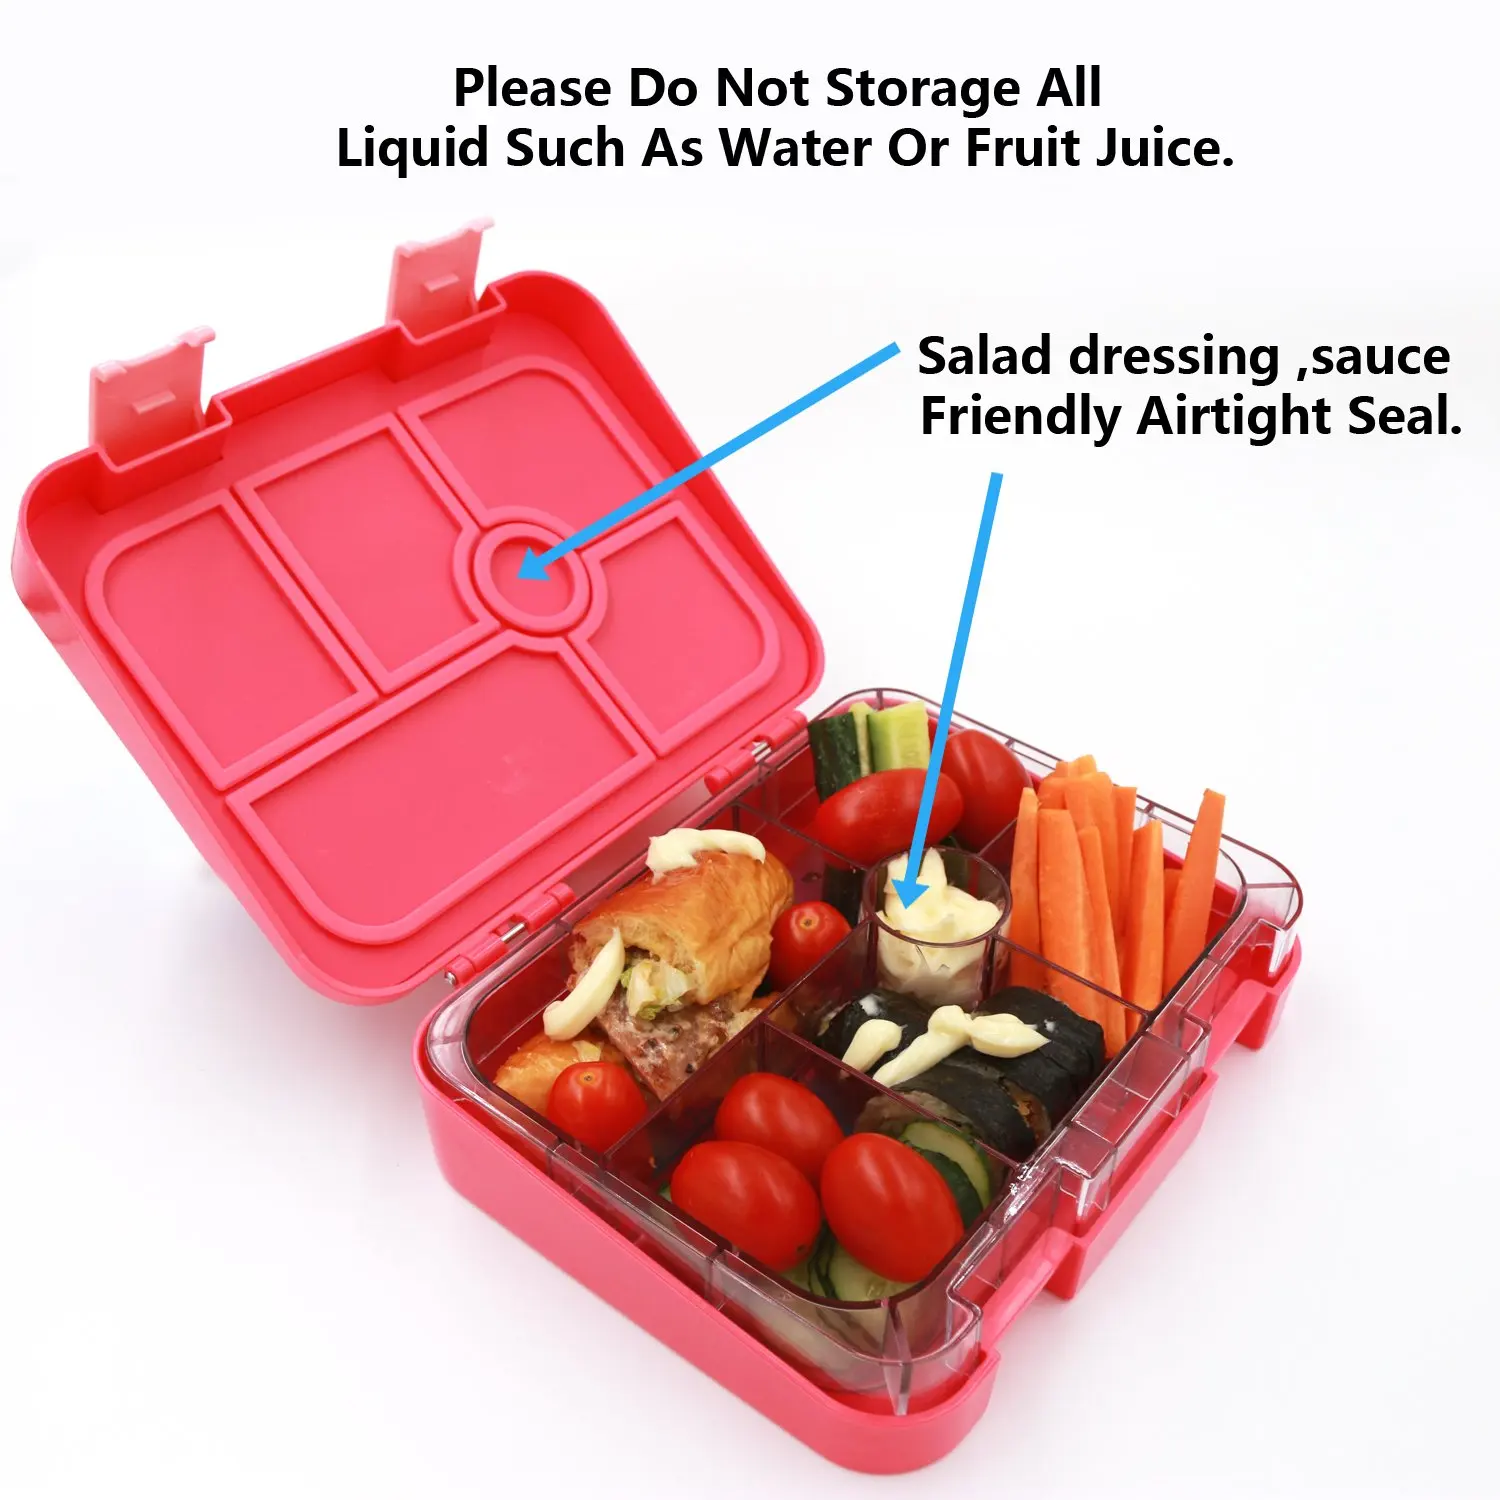 Aohea Bento Box for Kids Lunch Containers Removable Ice Packs